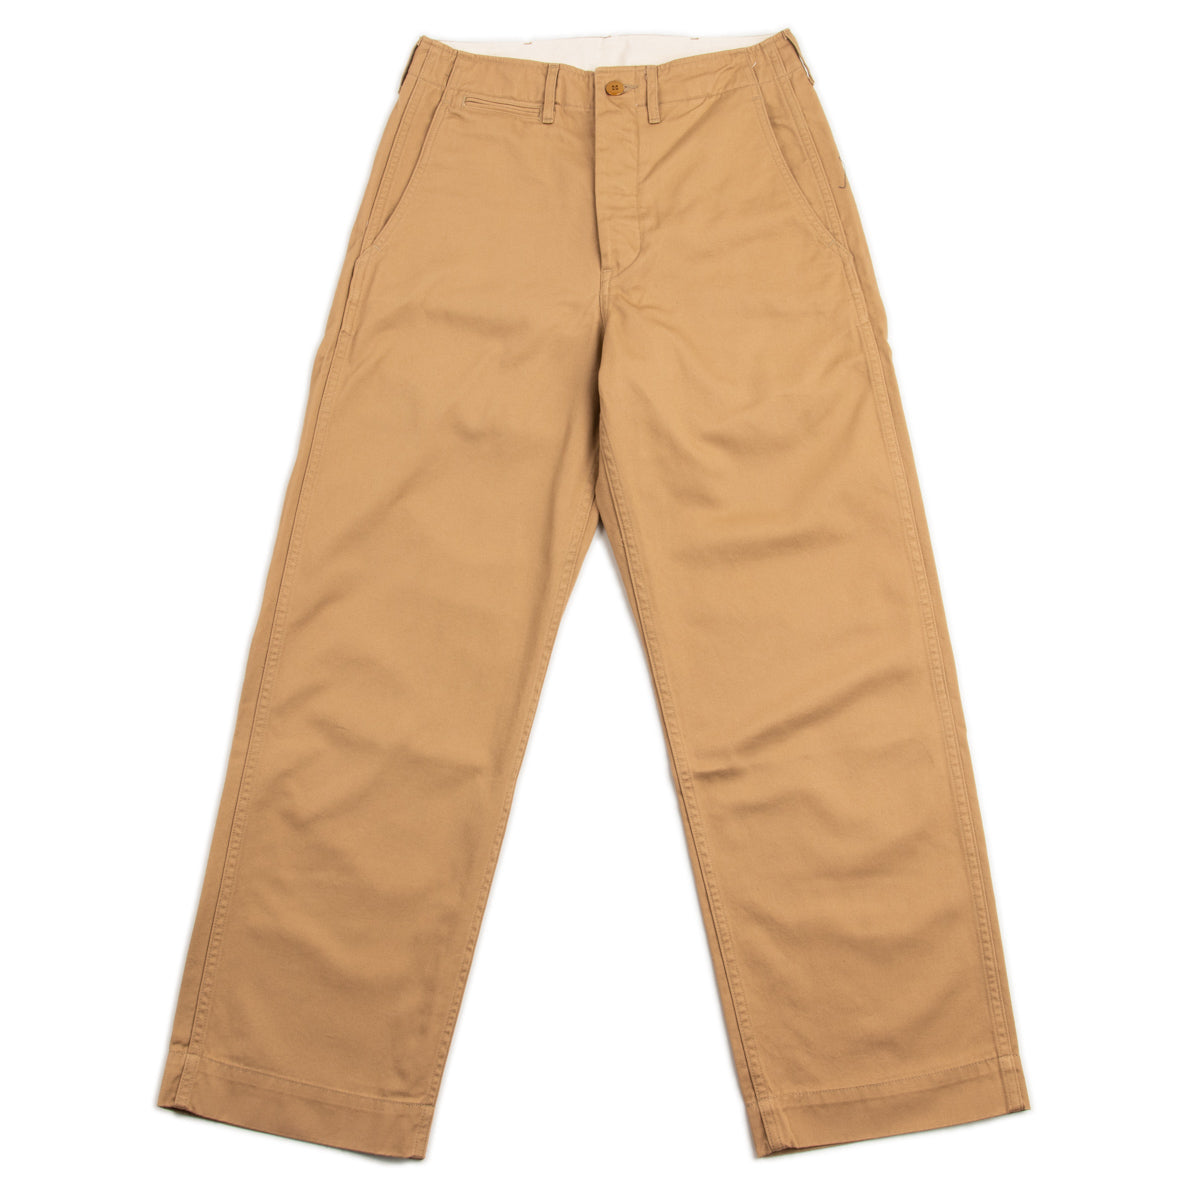 Men's Every Wear Athletic Fit Chino Pants - Goodfellow & Co™ : Target